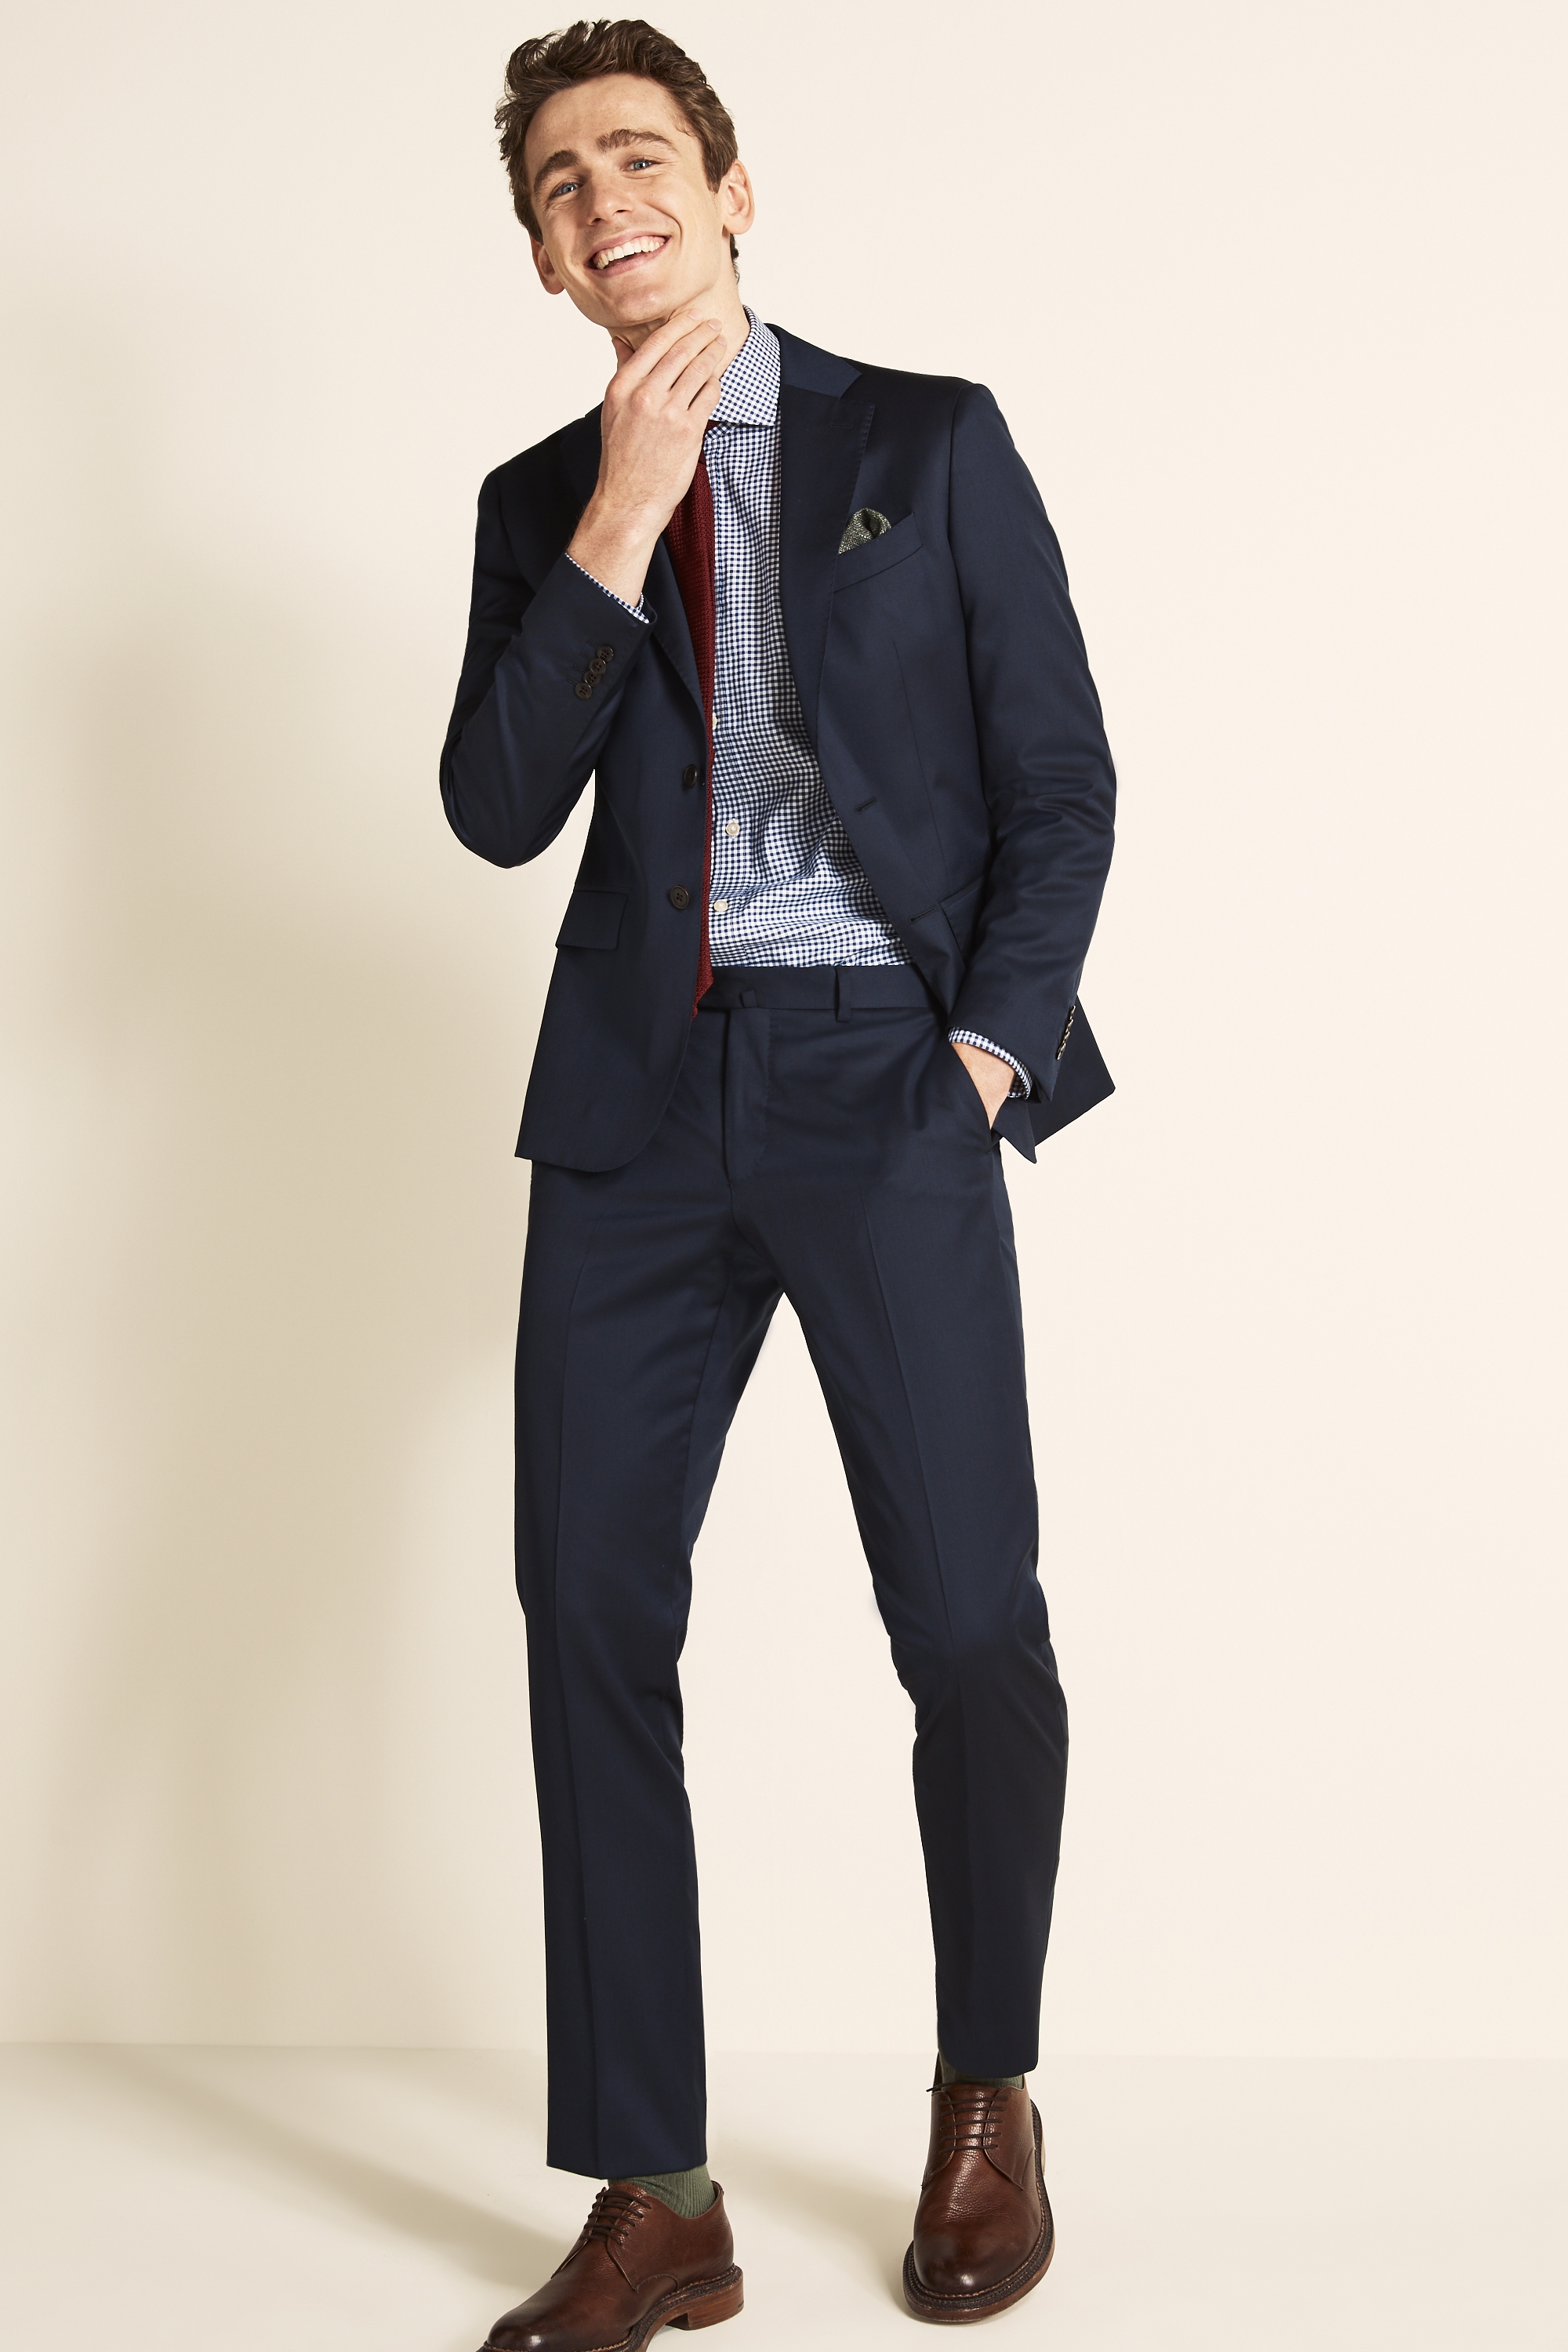 Savoy Taylors Guild Tailored Fit Navy Twill Jacket